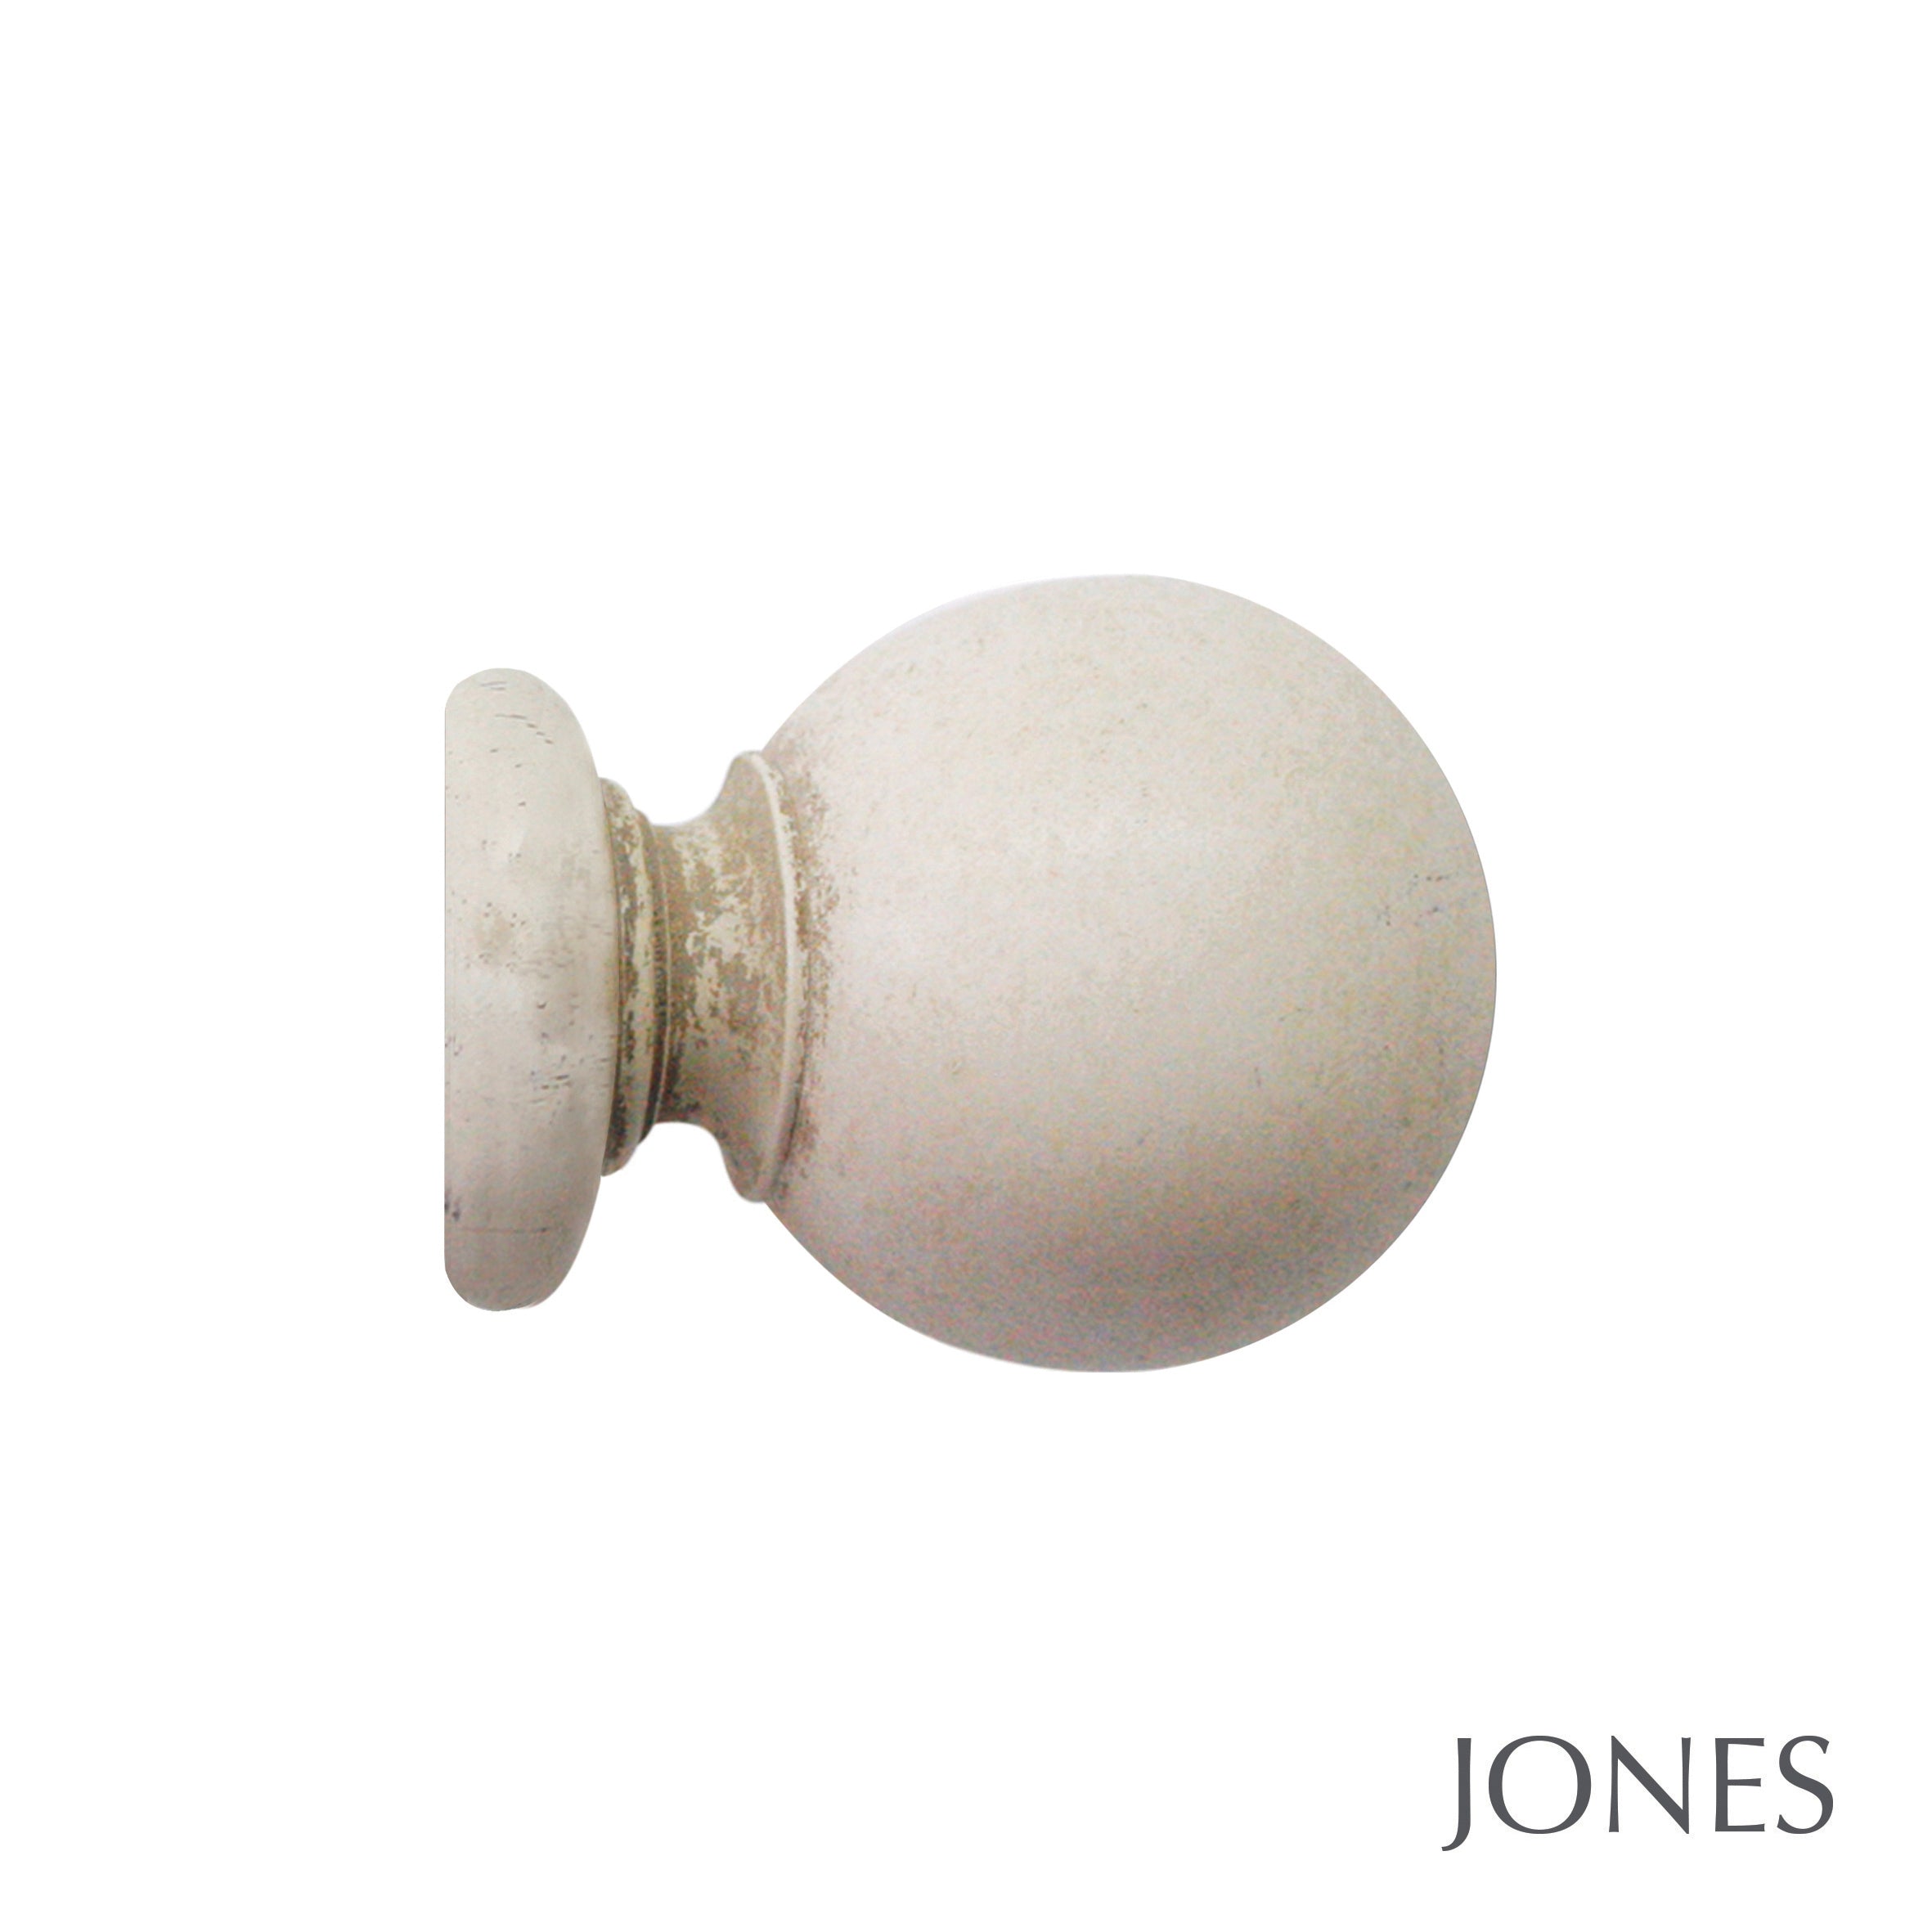 Jones Interiors Cathedral Ball Finial Curtain Pole Set in Putty